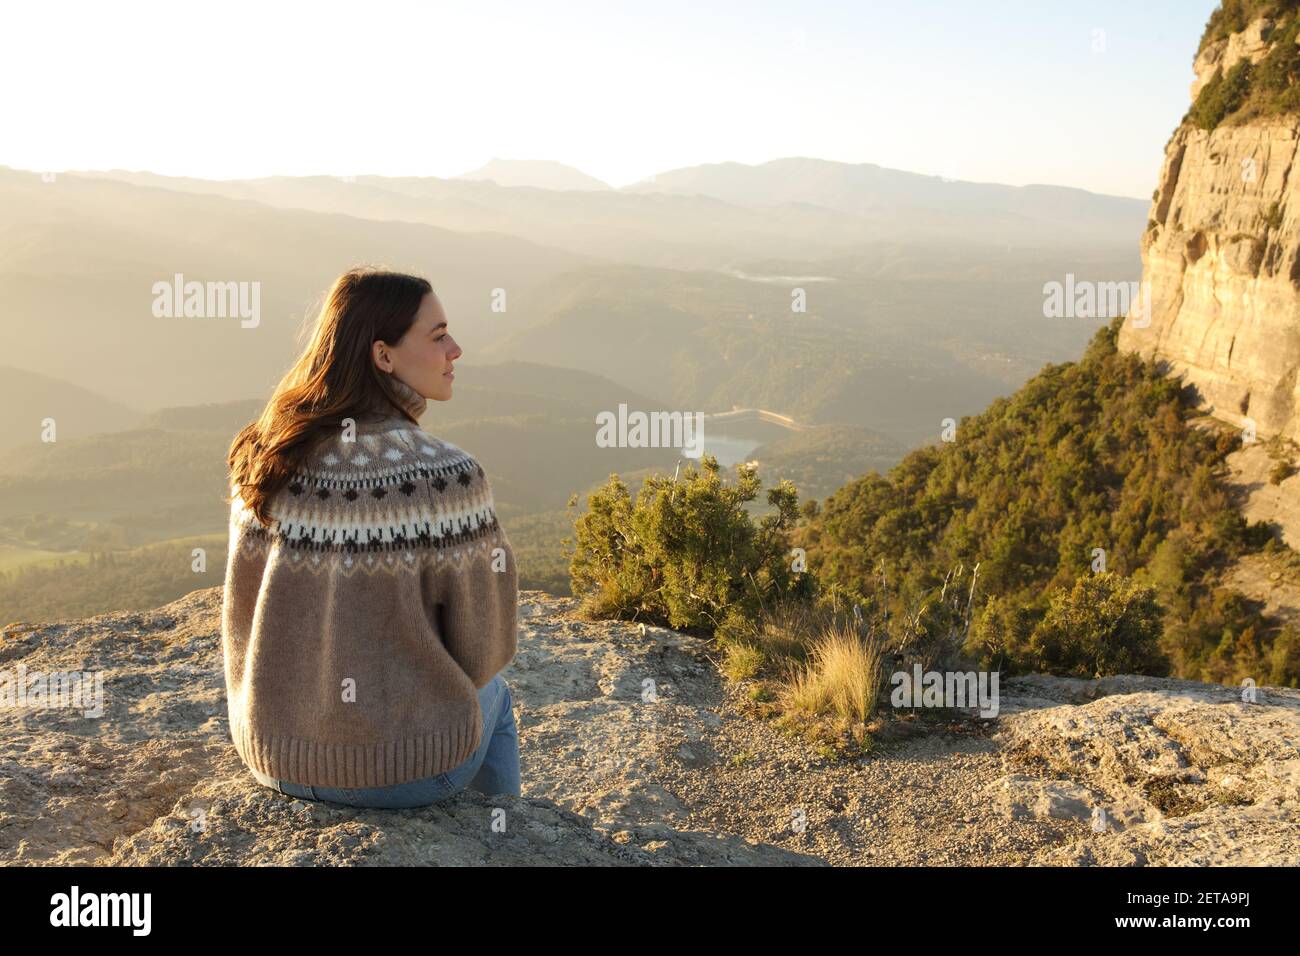 Back view portrait of a woman sitting in a cliff contemplating views at sunset Stock Photo